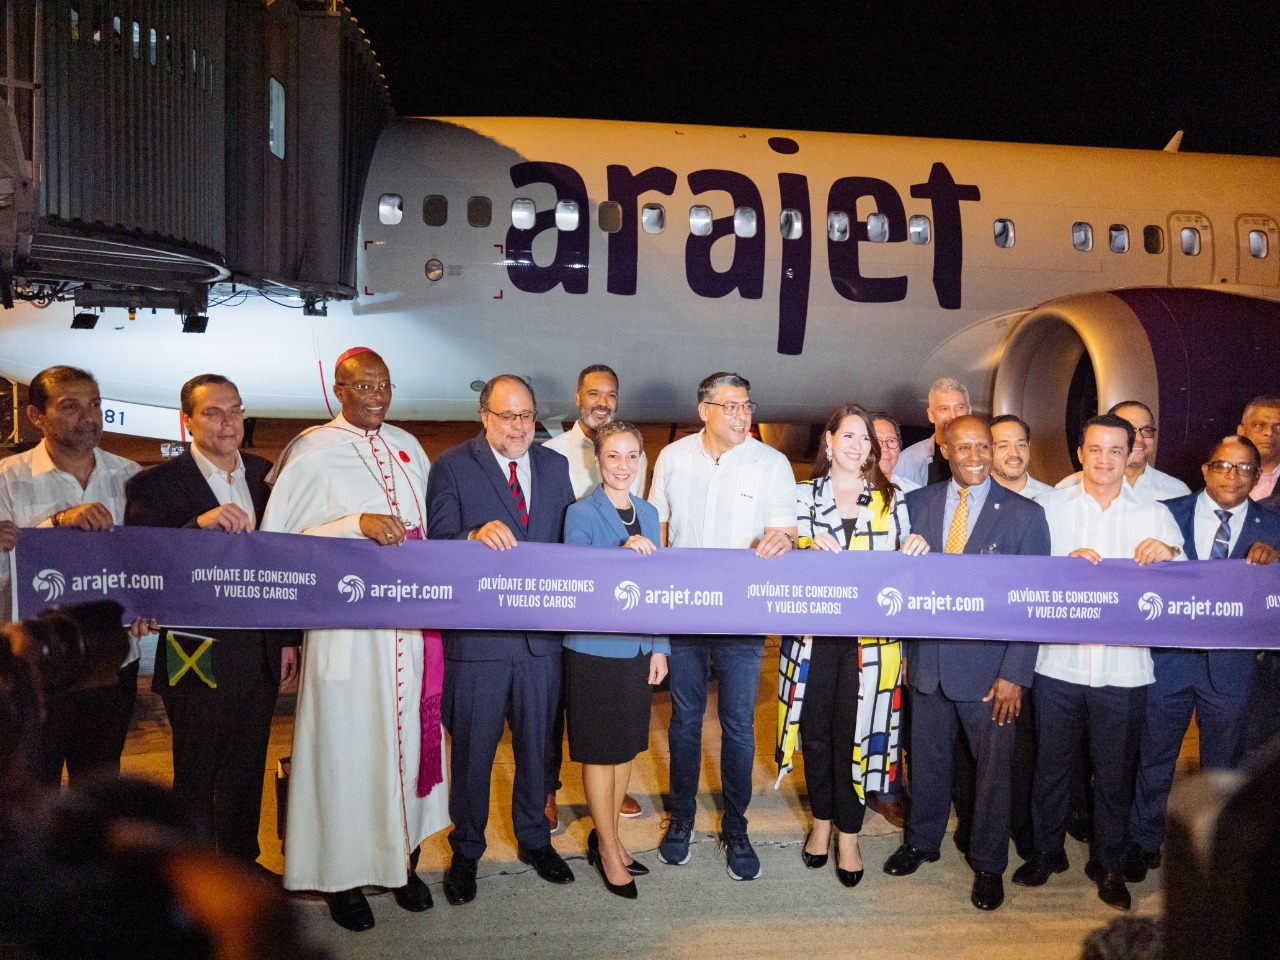 QA Legal, is part of the inaugural flight of the Arajet airline, Santo Domingo – Kingston.